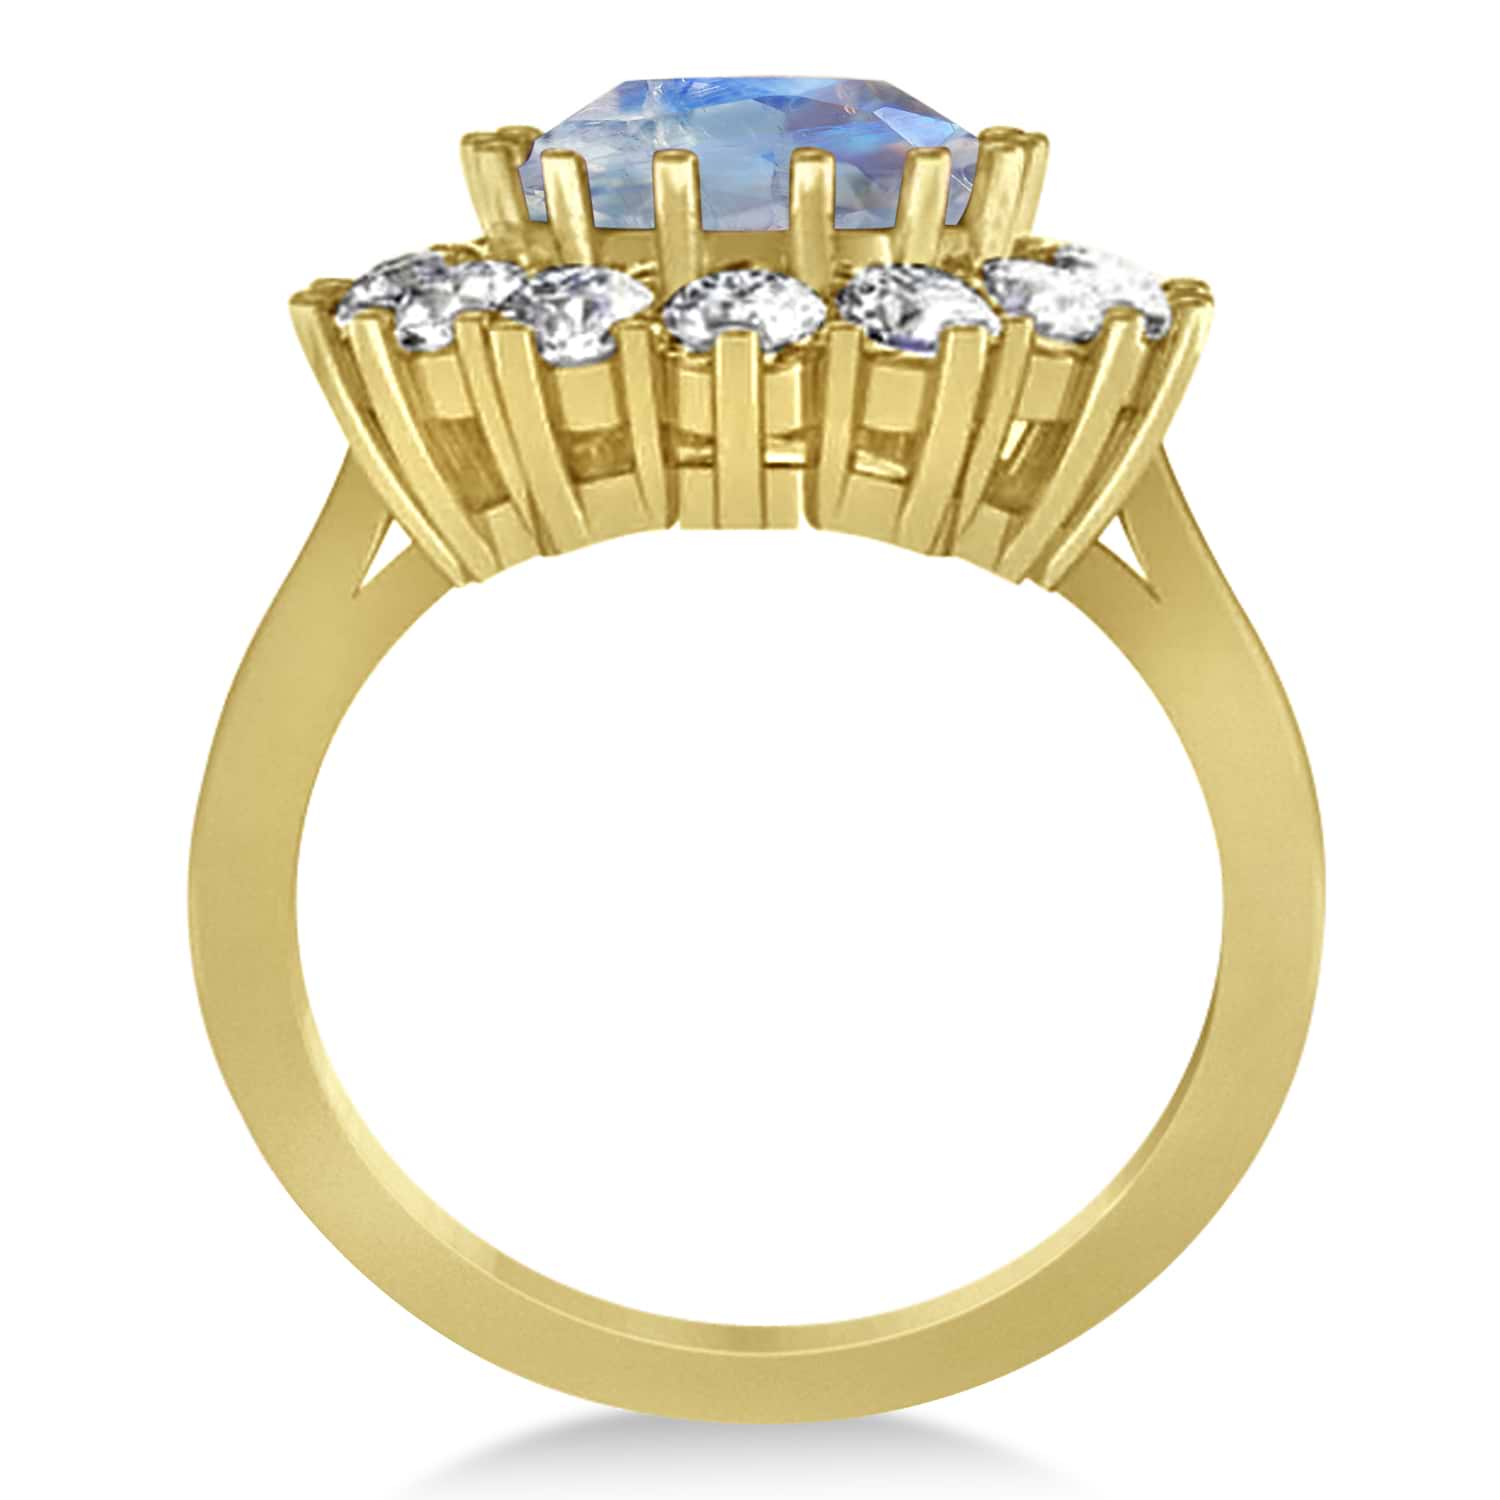 Oval Moonstone & Diamond Accented Ring in 14k Yellow Gold (5.40ctw)